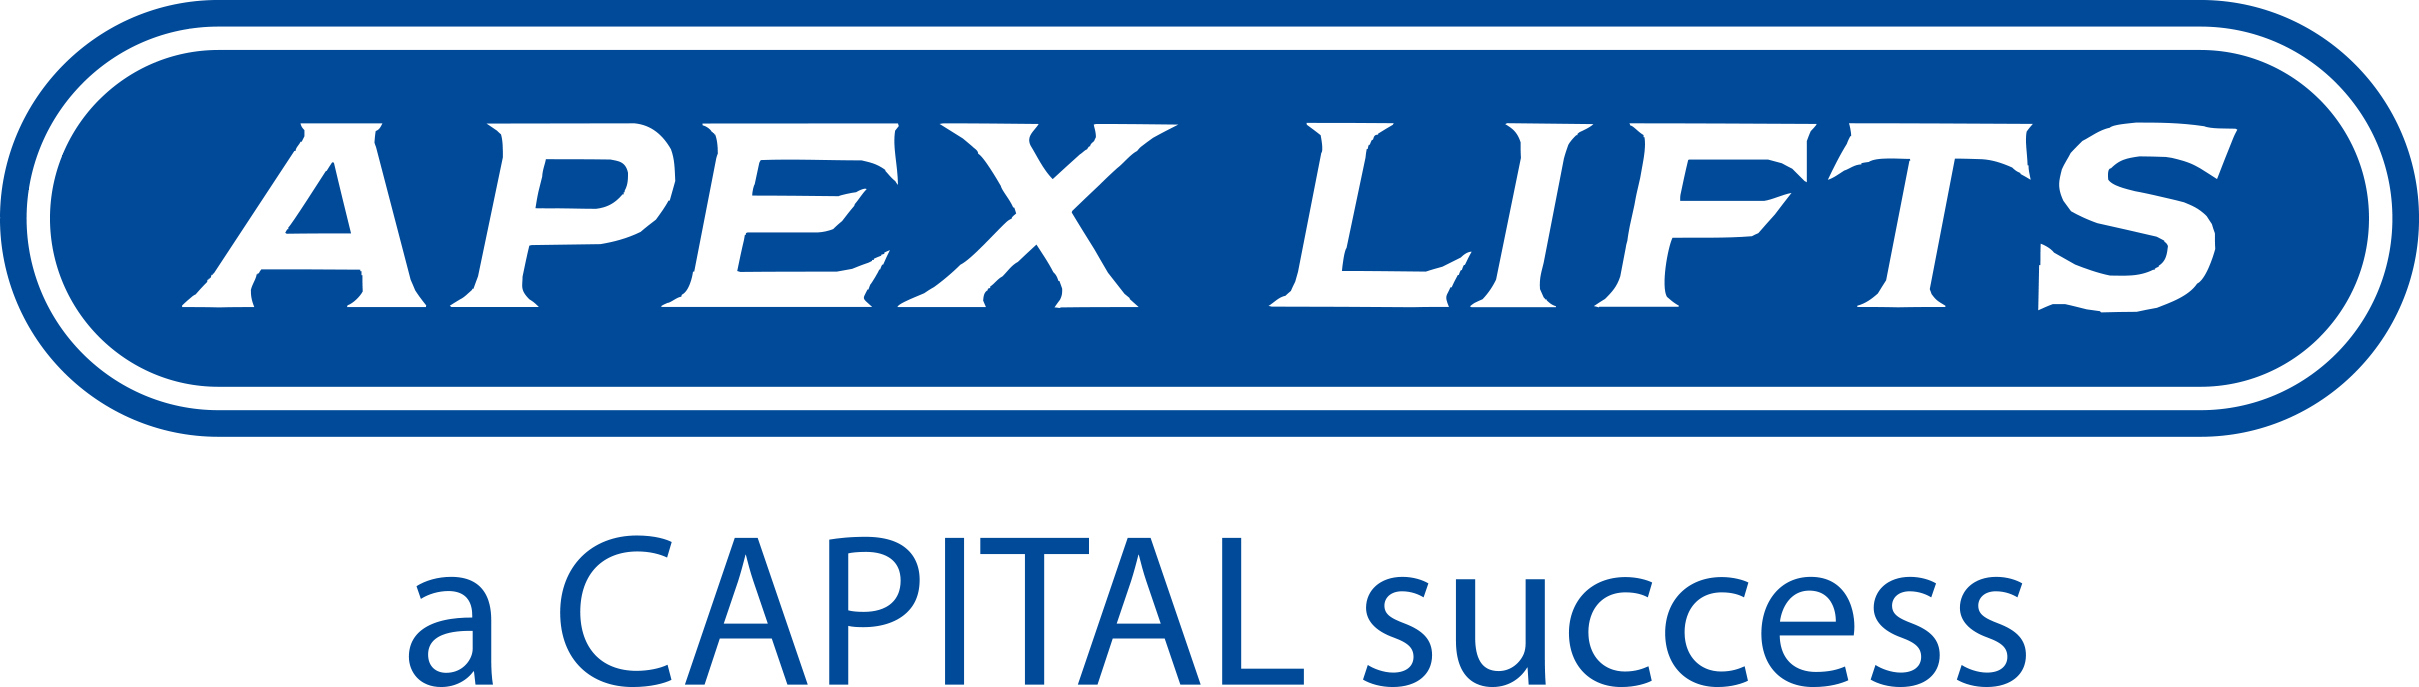 logo for Apex Lifts